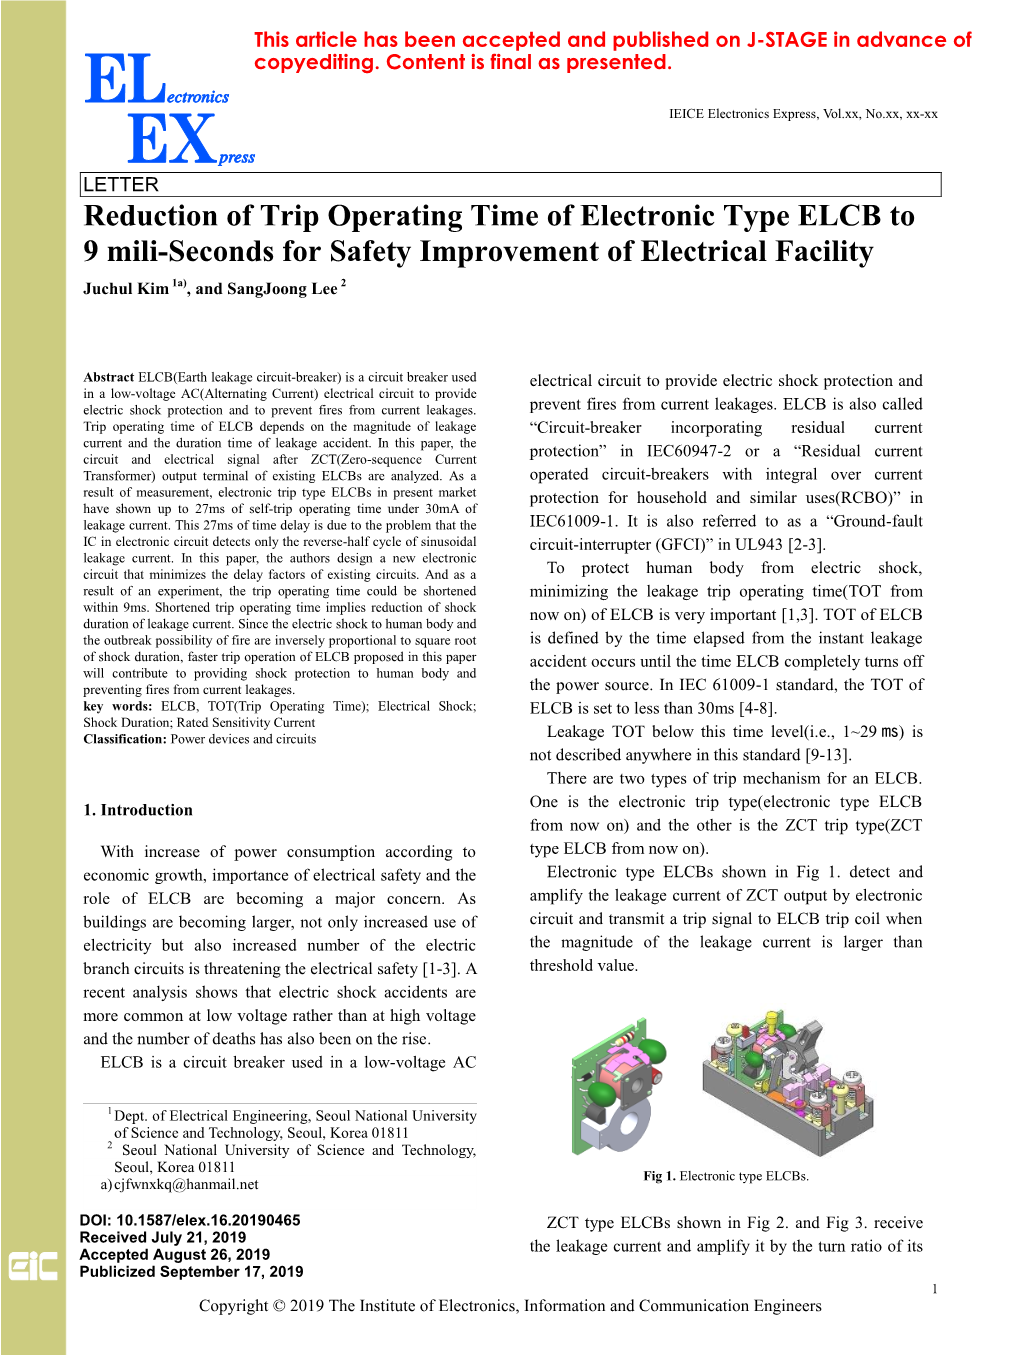 Reduction of Trip Operating Time of Electronic Type ELCB to 9 Mili-Seconds for Safety Improvement of Electrical Facility Juchul Kim 1A), and Sangjoong Lee 2